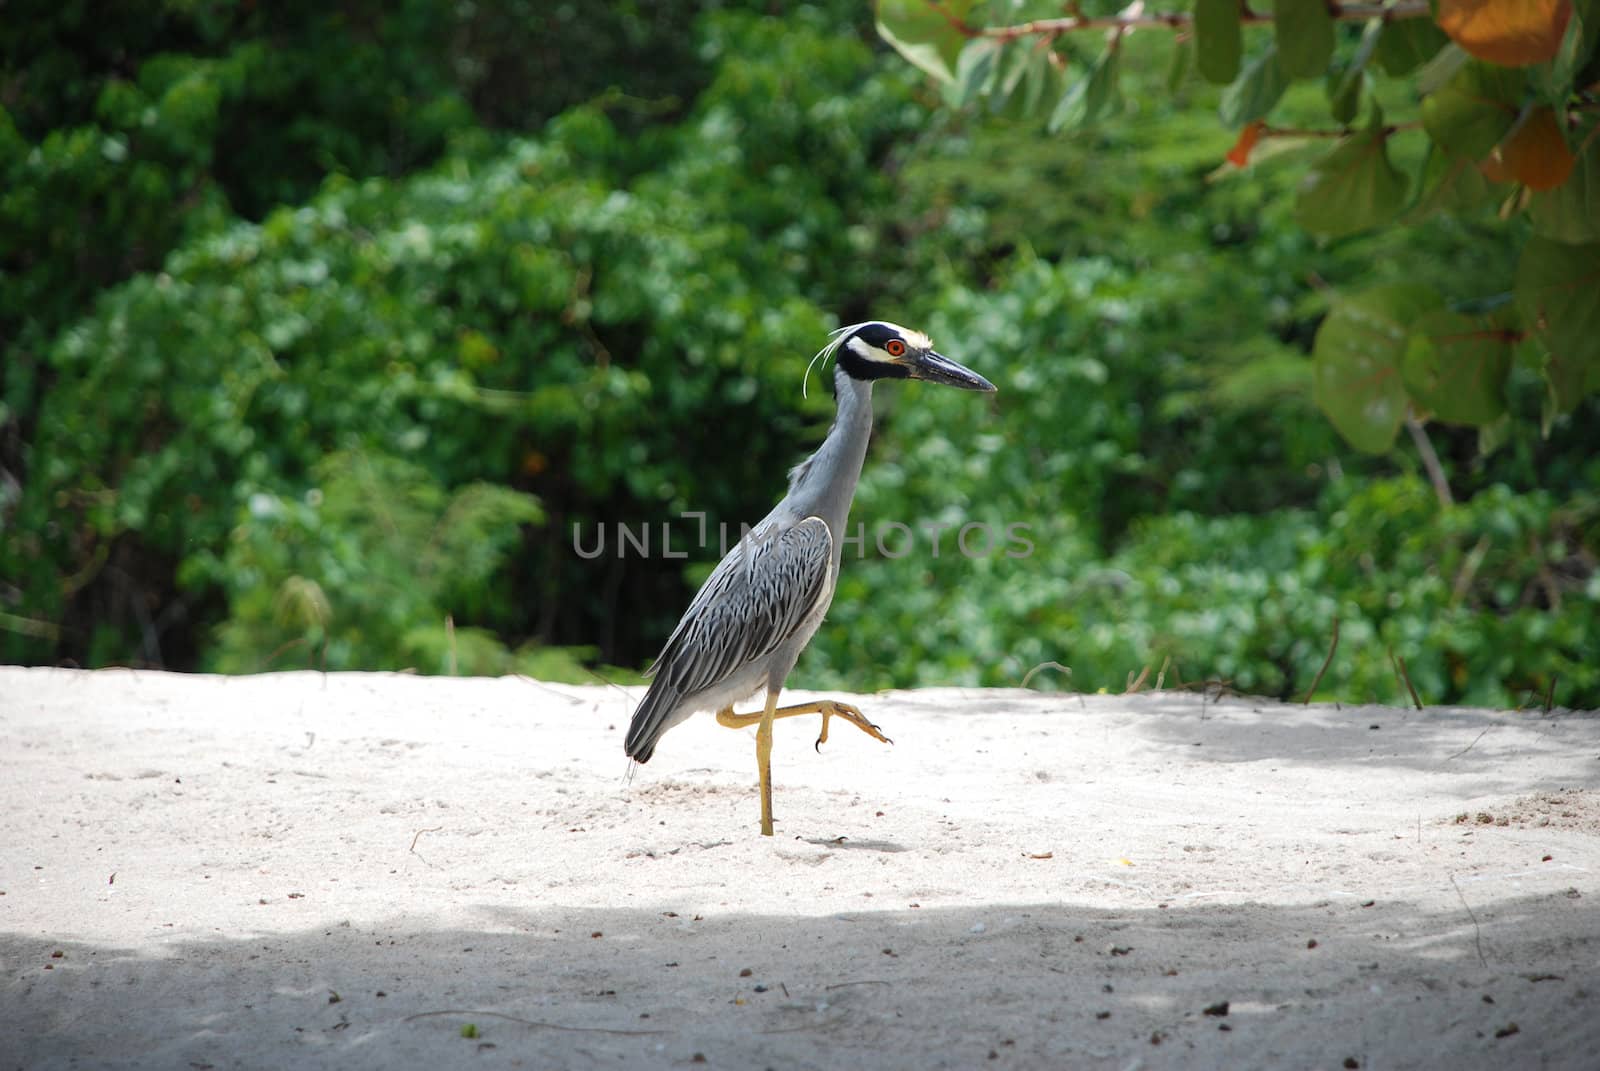 Yellow-crested night heron by sarahdoow